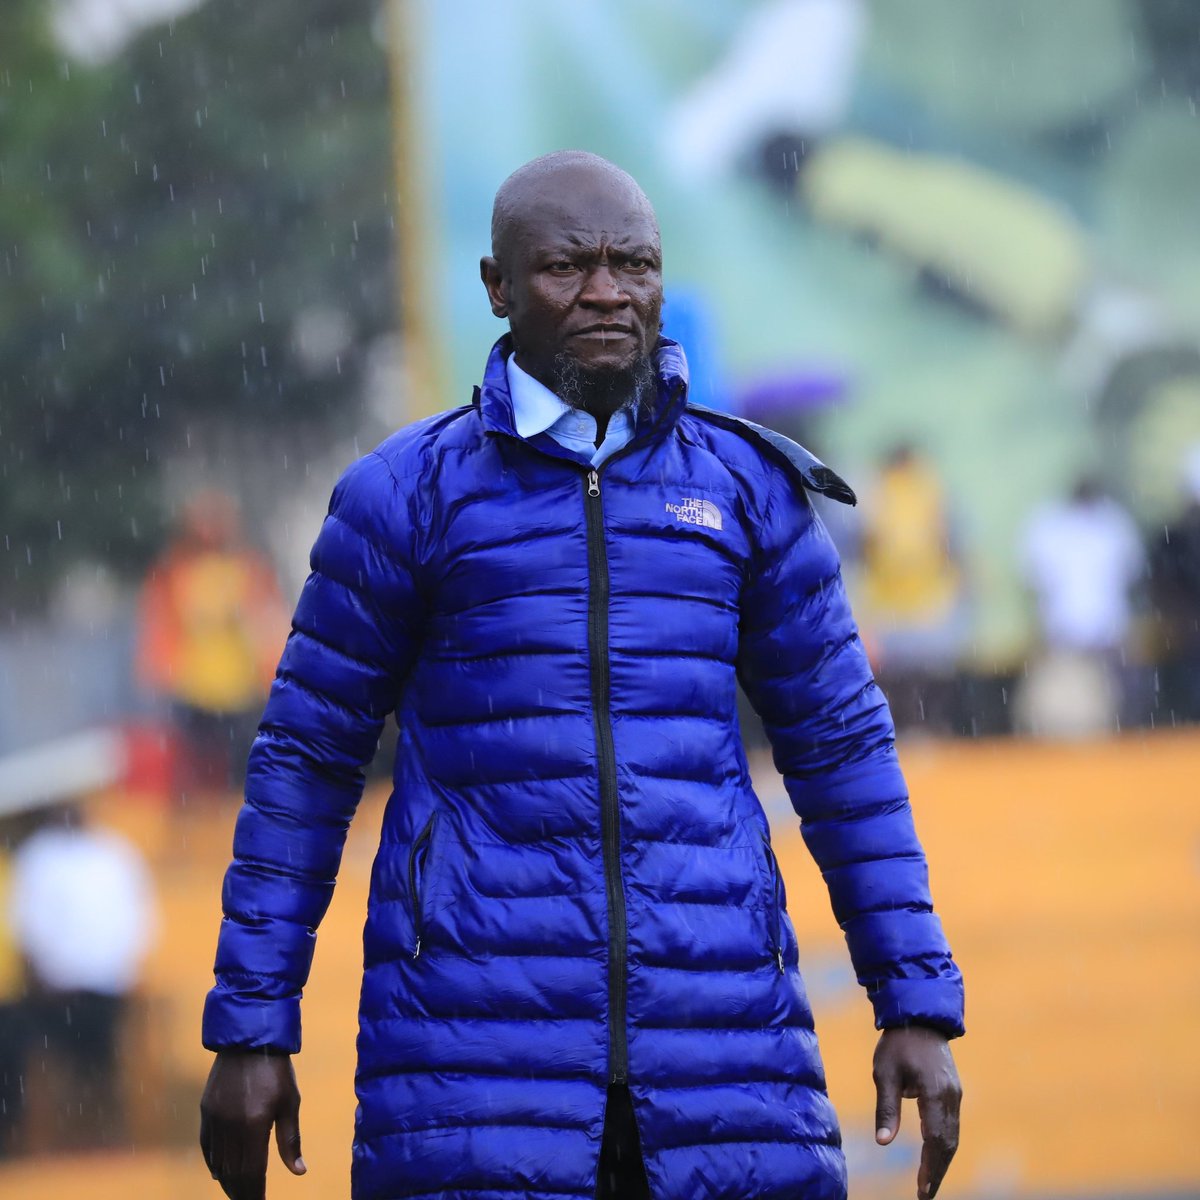 Coach Hussein Mbalangu has taken his side NEC FC to their first ever stanbic Uganda cup final. He is already my coach of the season. Mbalangu studies opponents & applies successful game approaches He has improved a number of players too. #R14Football